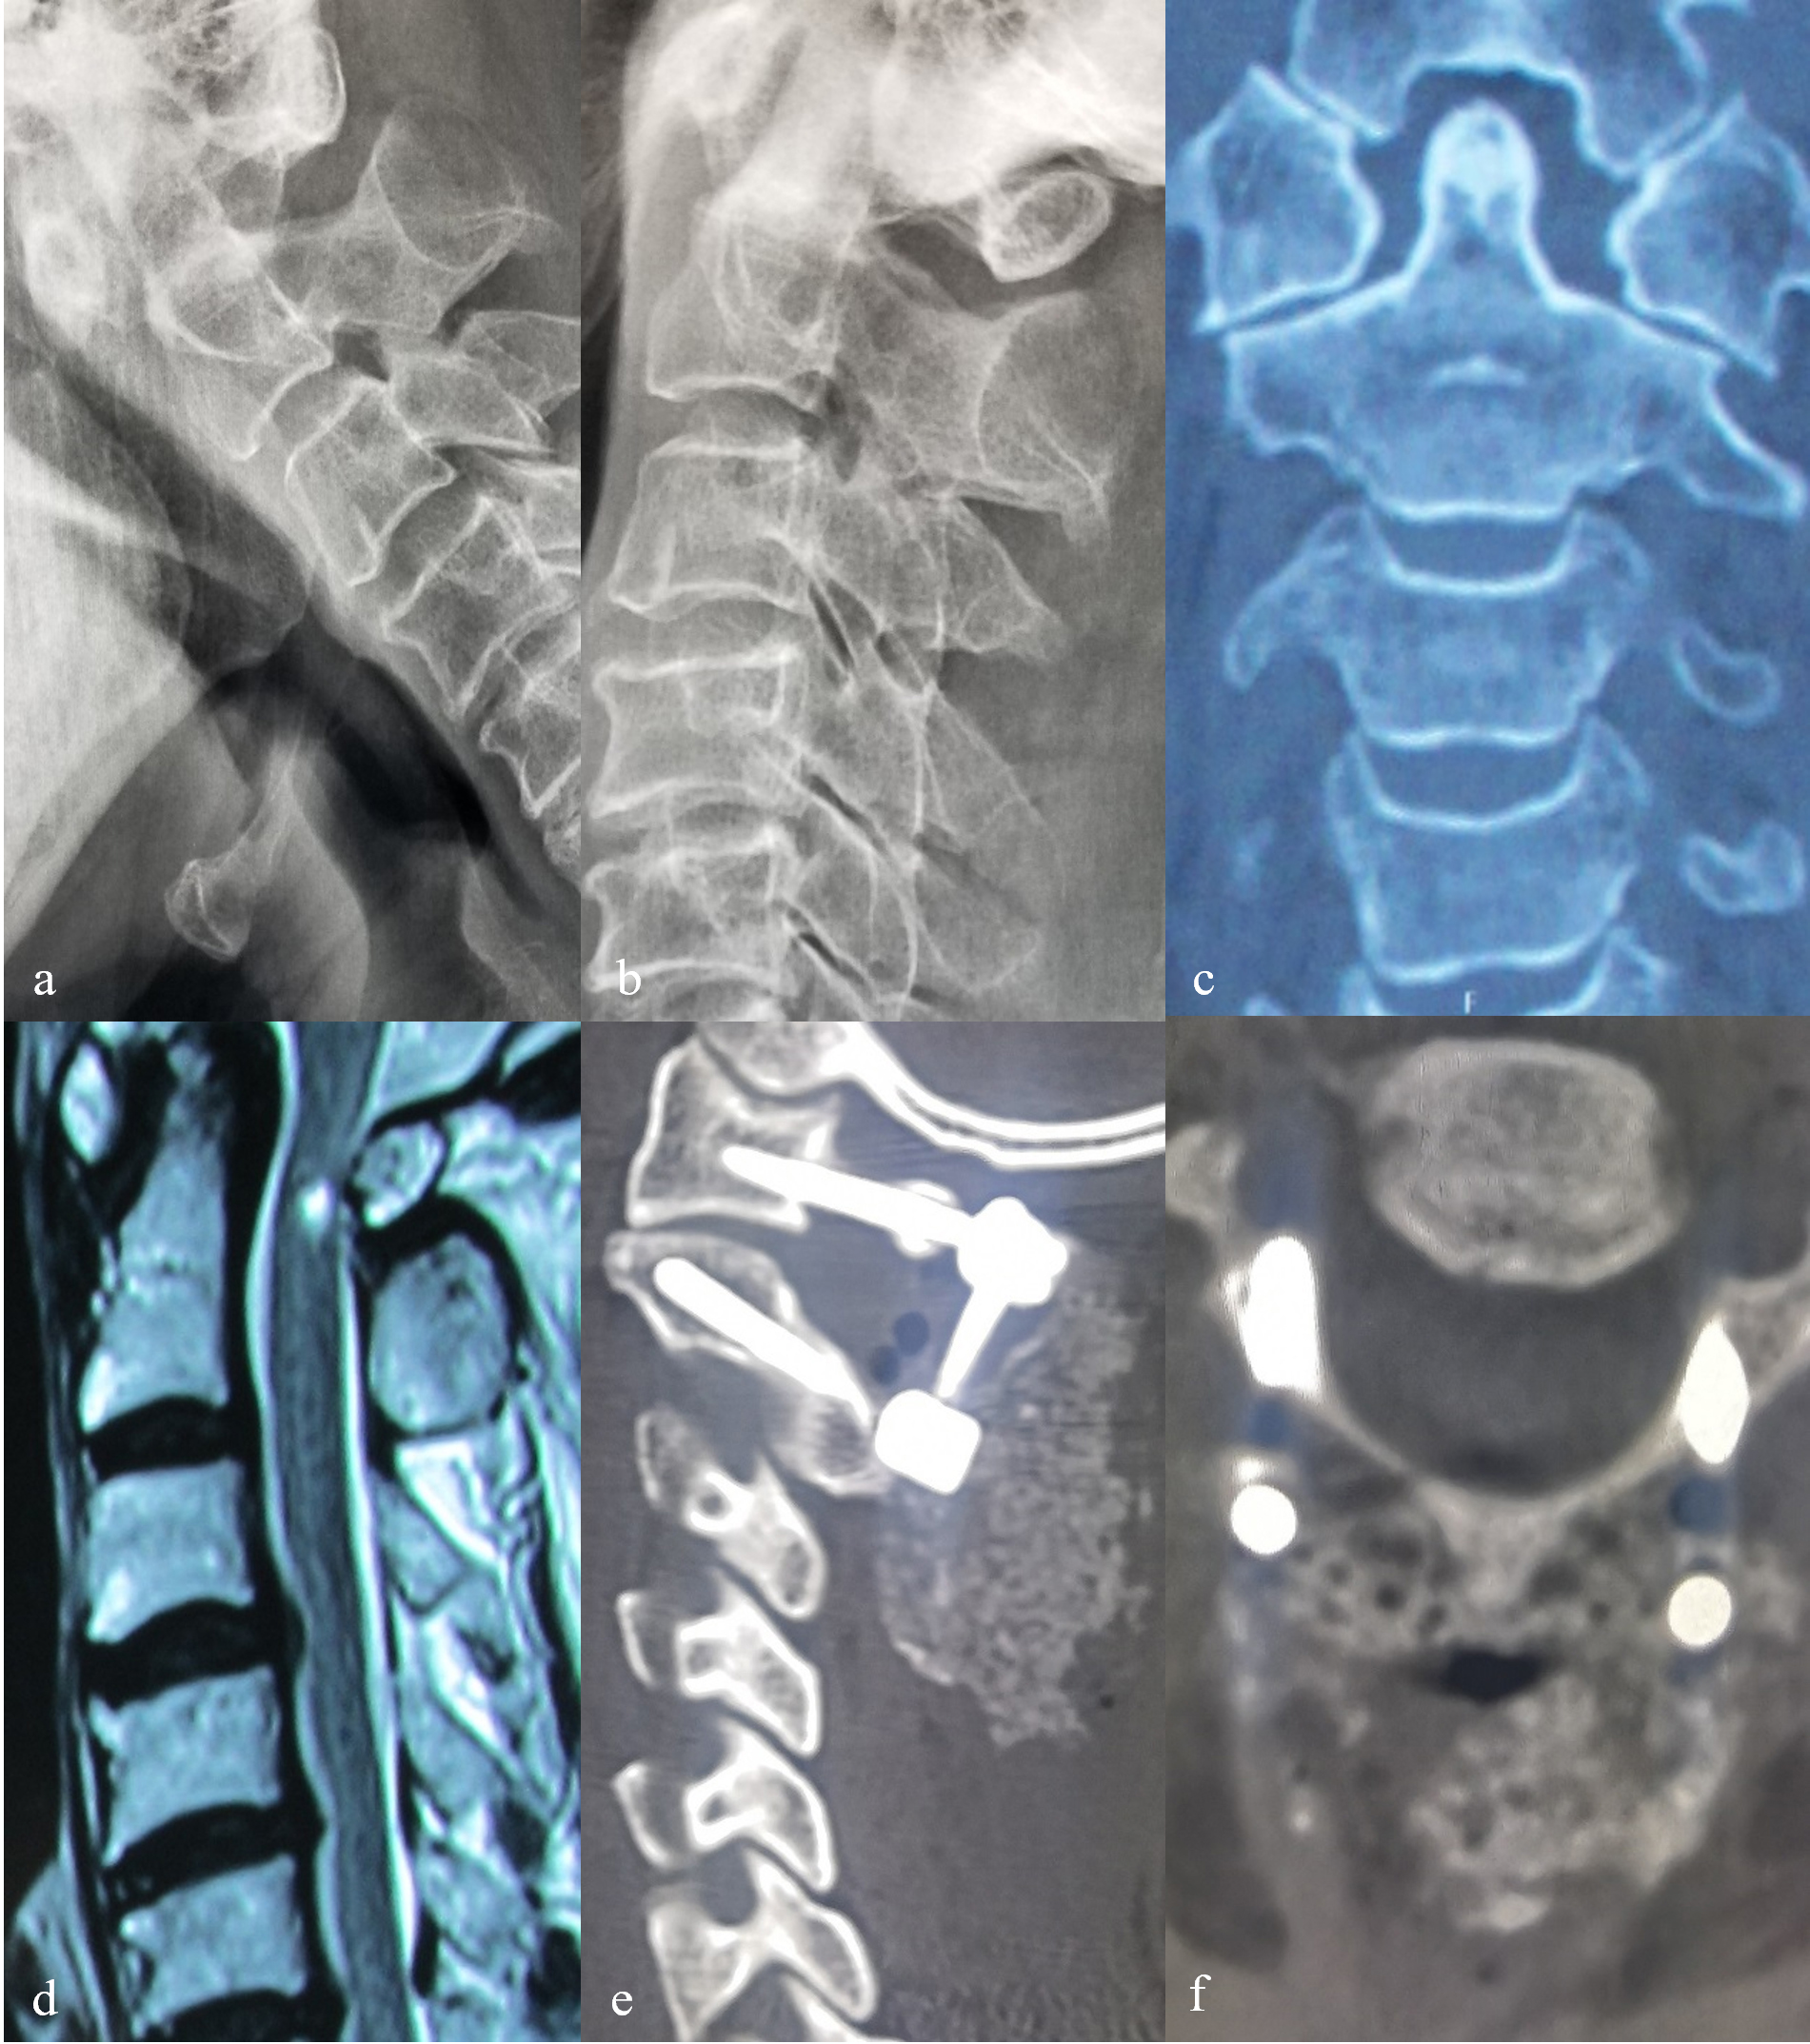 Male, 68 years old, atlantoaxial dislocation caused by high-fall injury leading to a cervical spinal cord injury and quadriplegia in the bilateral group. A–C: Preoperative dynamic X-ray film and coronal CT showed atlantoaxial dislocation. D: Preoperative MRI T2WI showed intramedullary hyperintensity at the odontoid level. E, F: The sagittal and axial CT at 6 months after surgery showed the implants were in a good position, the bone mass in the bone graft area was sufficient, and the osseous fusion was observed.